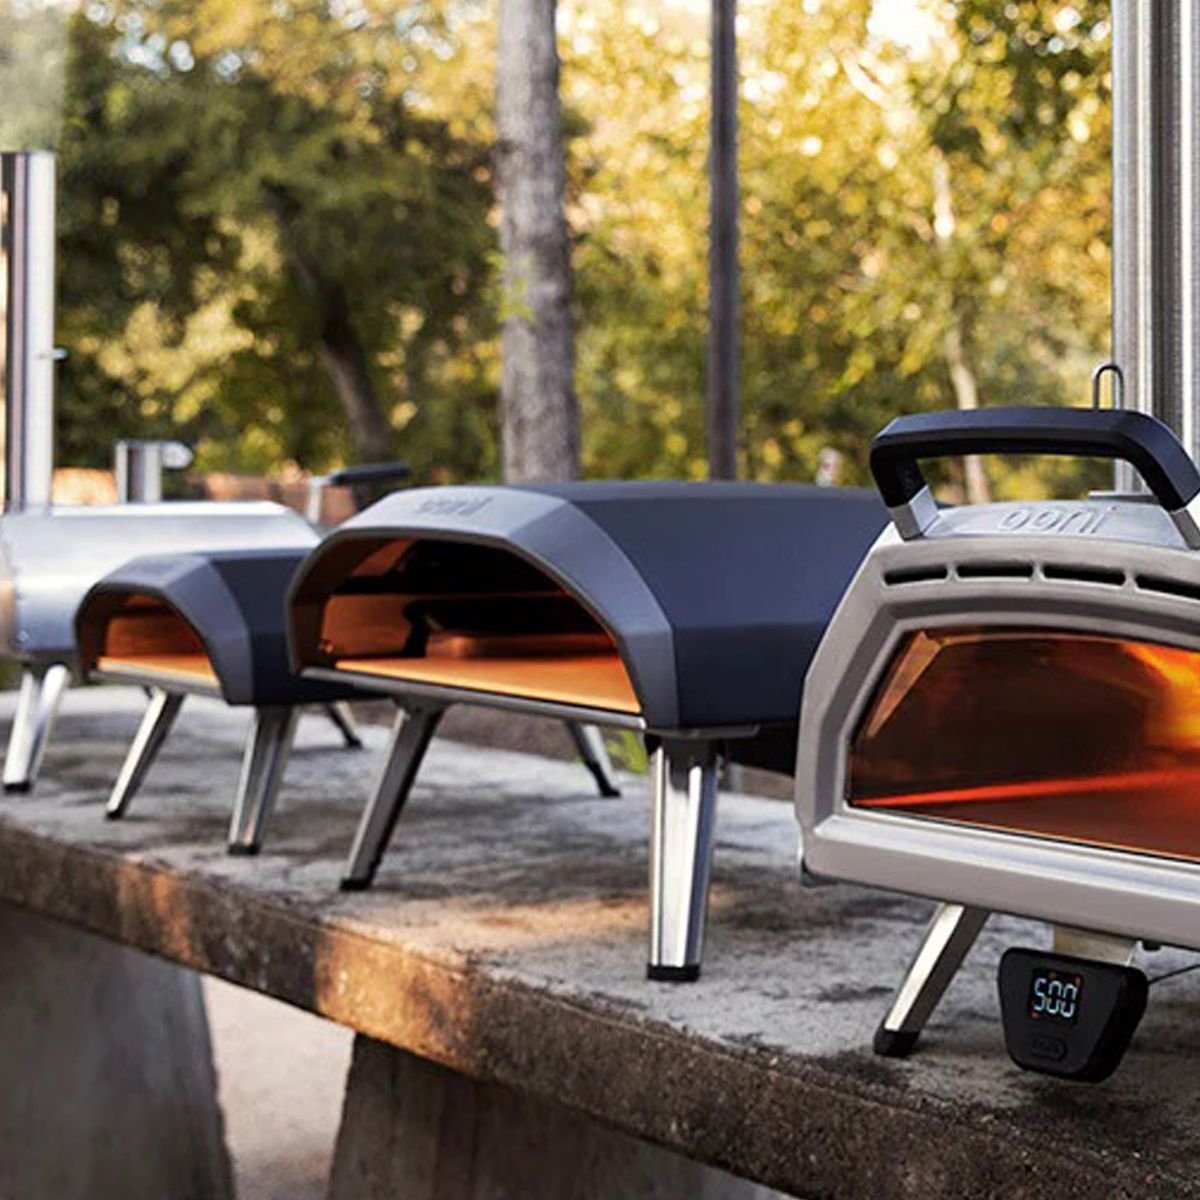 Which Ooni pizza oven should you buy? We put the Fyra, Koda and Karu to the test